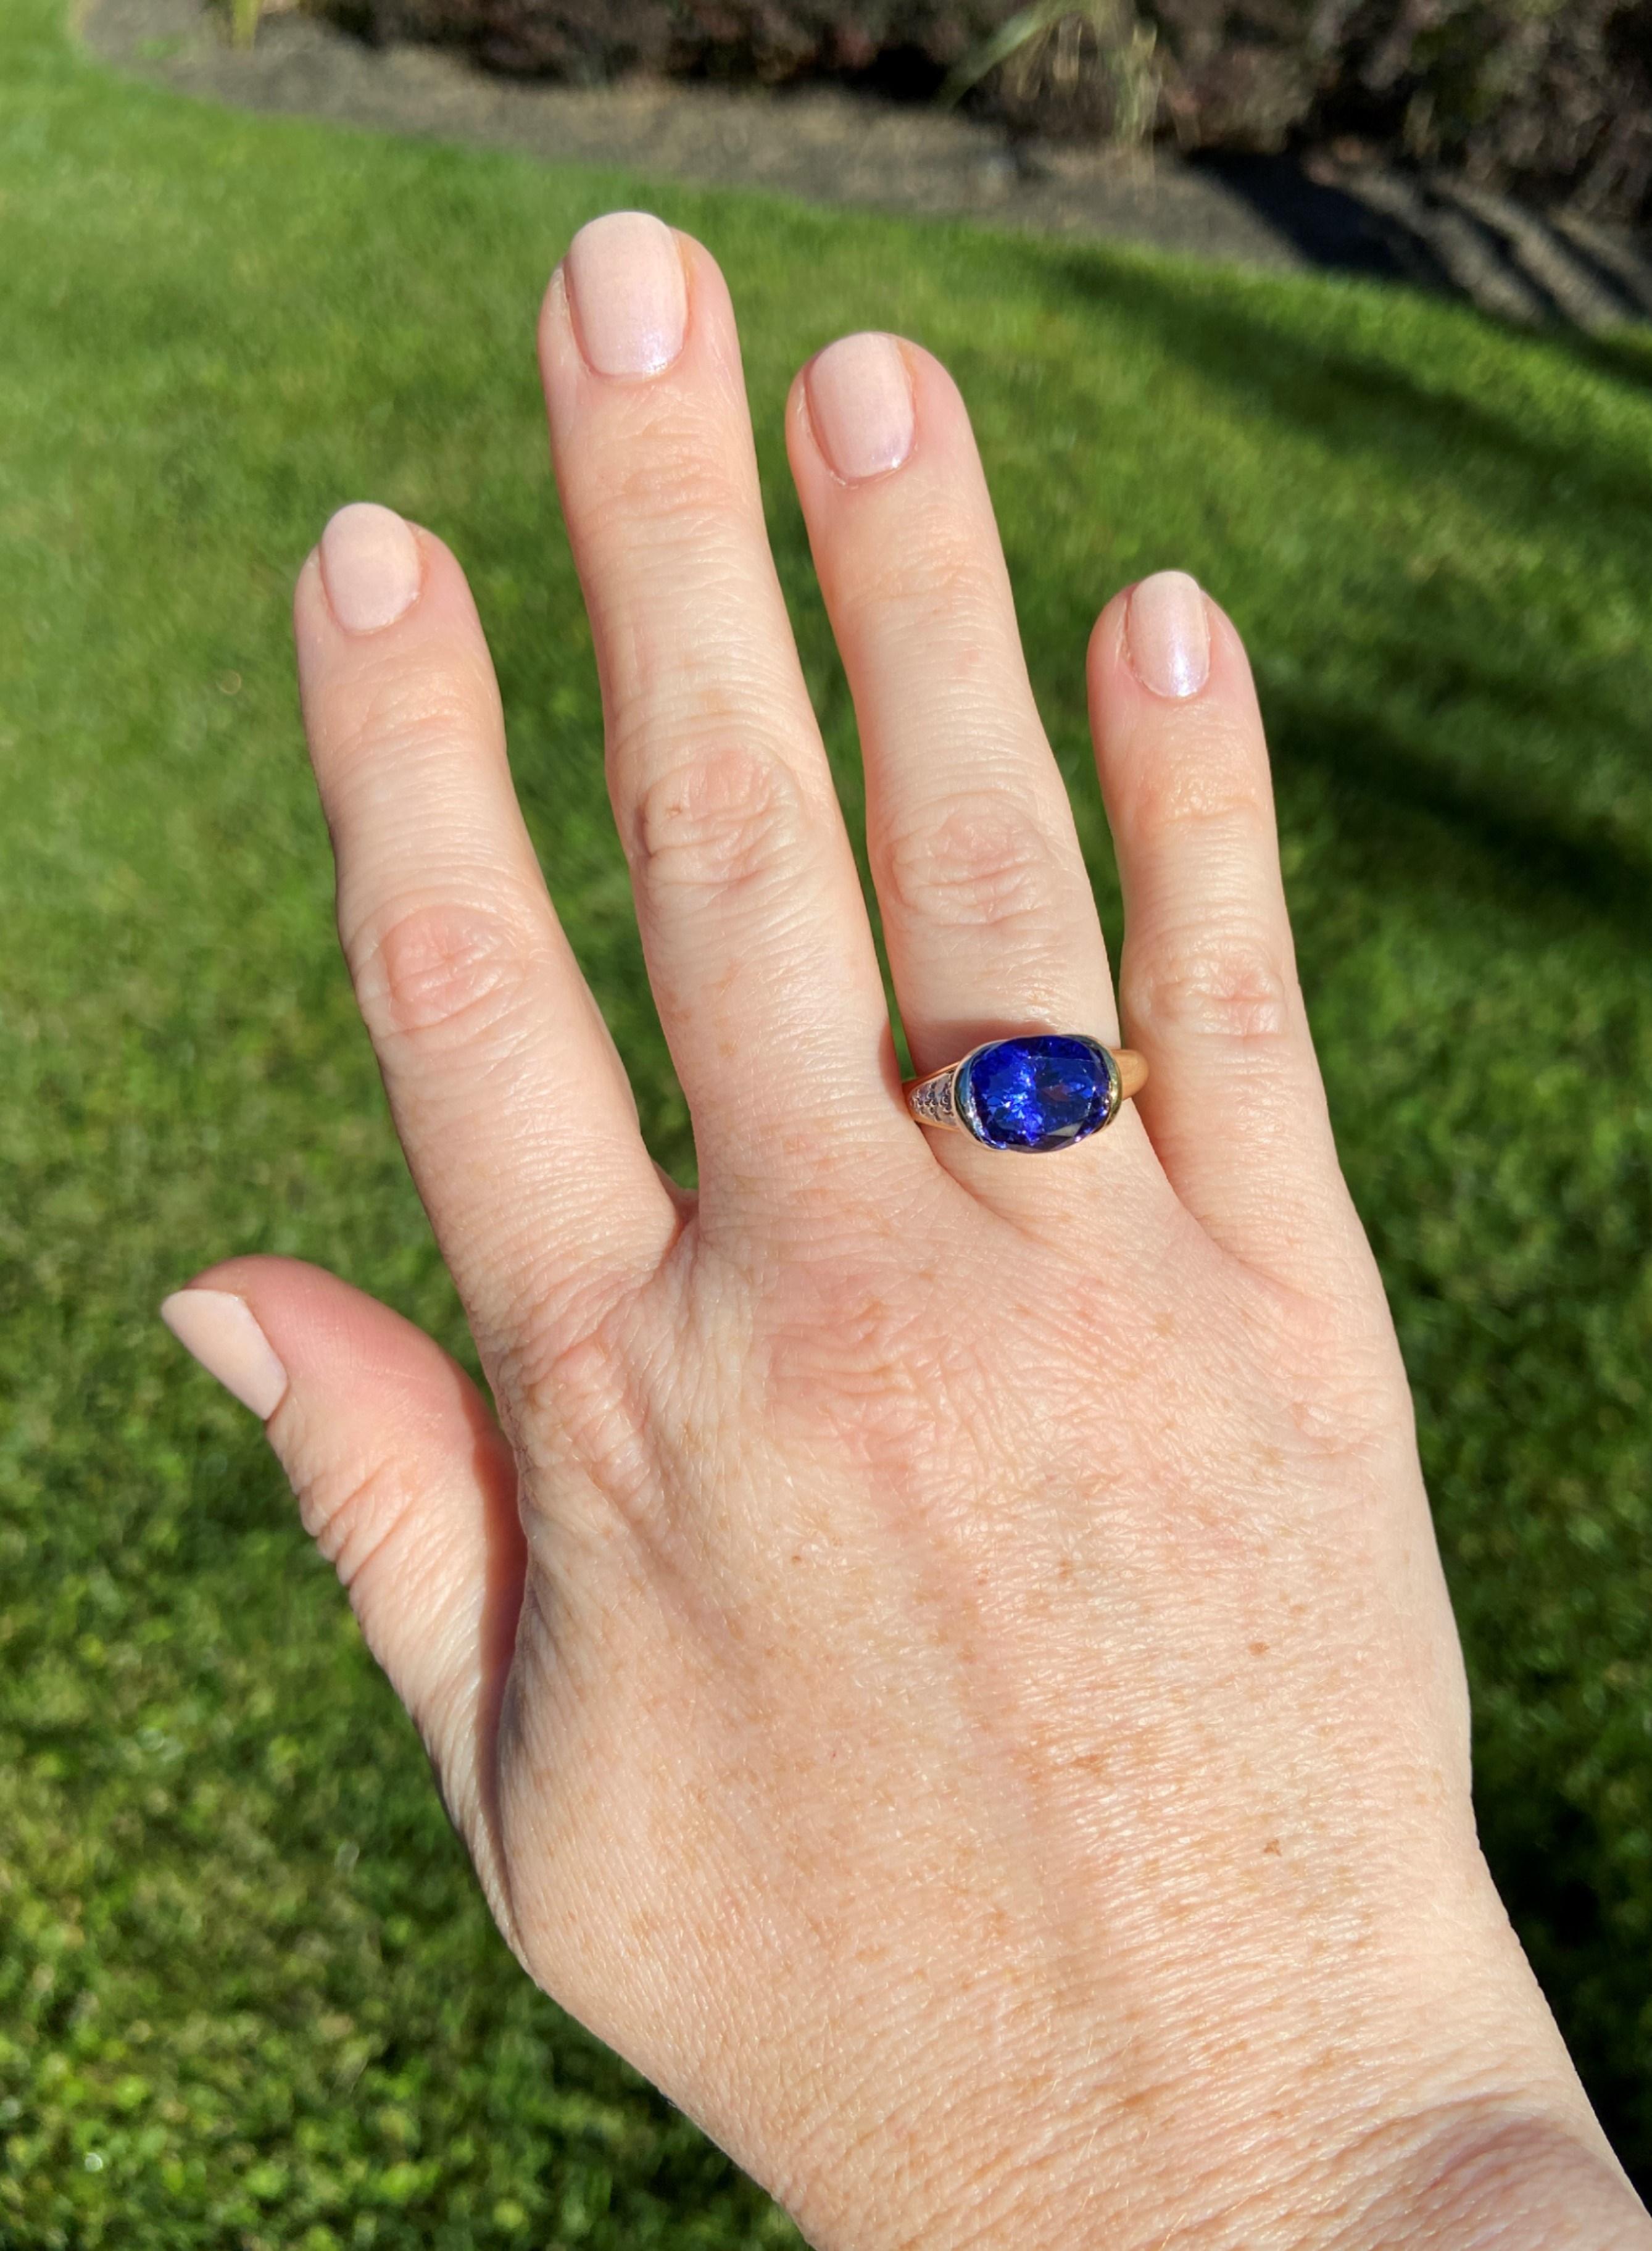 An exceptionally colored 4.5ct tanzanite is held in an east-west setting at the center of this substantial 18K yellow gold and platinum ring. One shoulder of the tanzanite is buttery 18k yellow gold and the other is platinum studded with 0.62tcw of